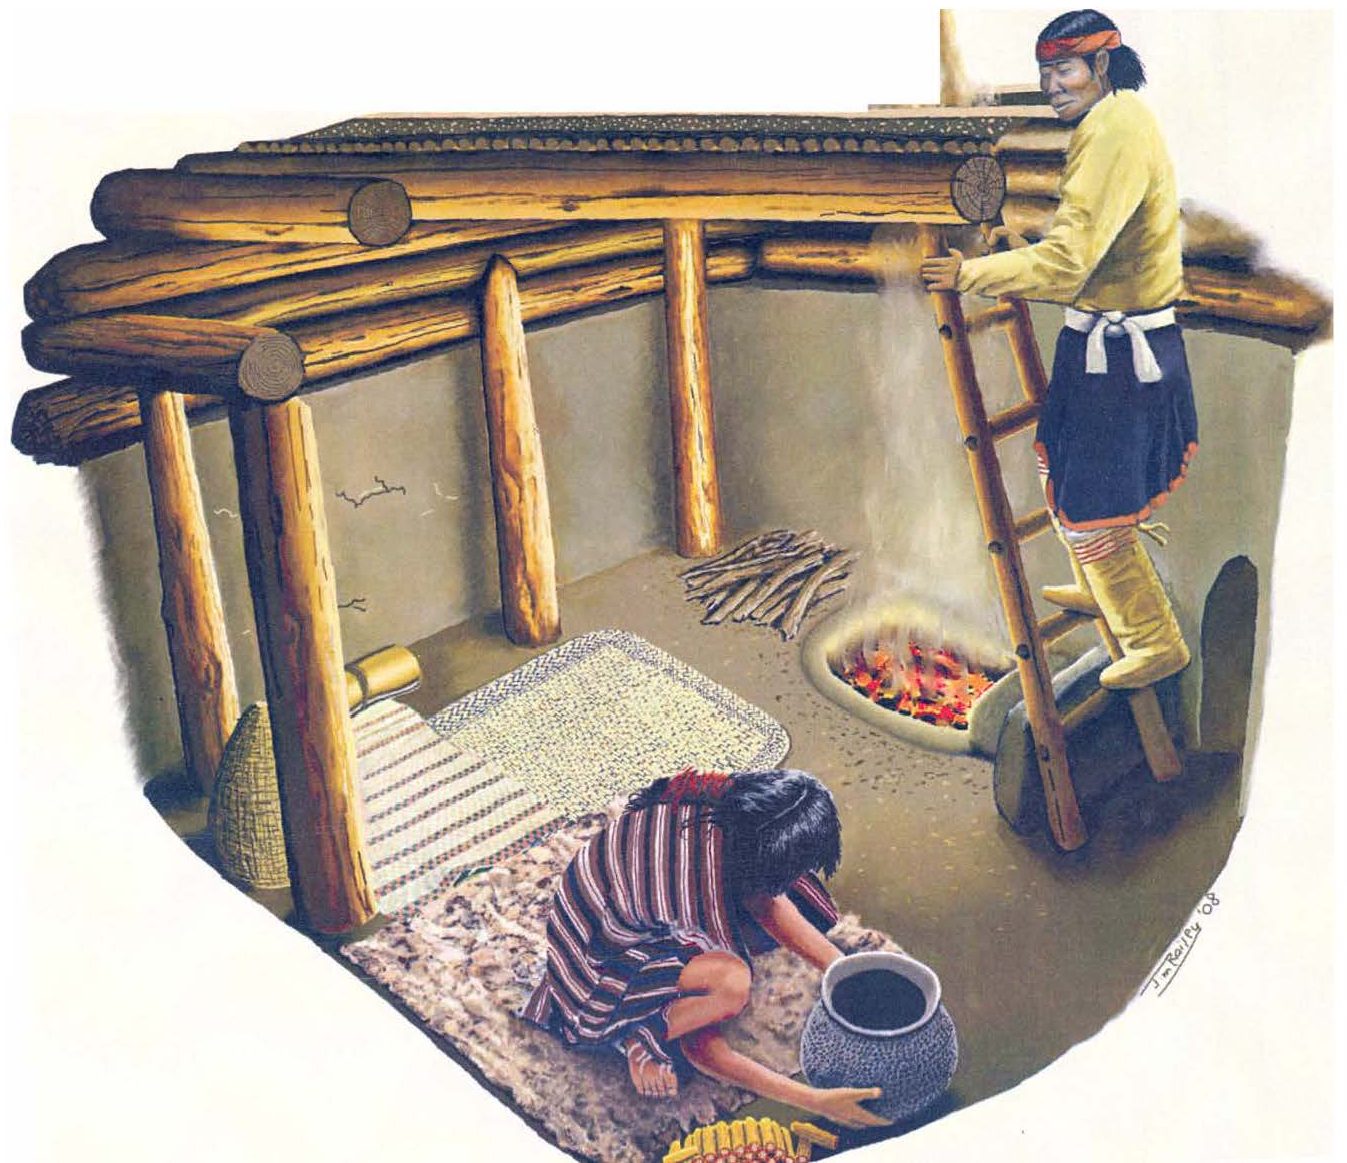 Artist's reconstruction of a Hokona pithouse interior and daily activities.